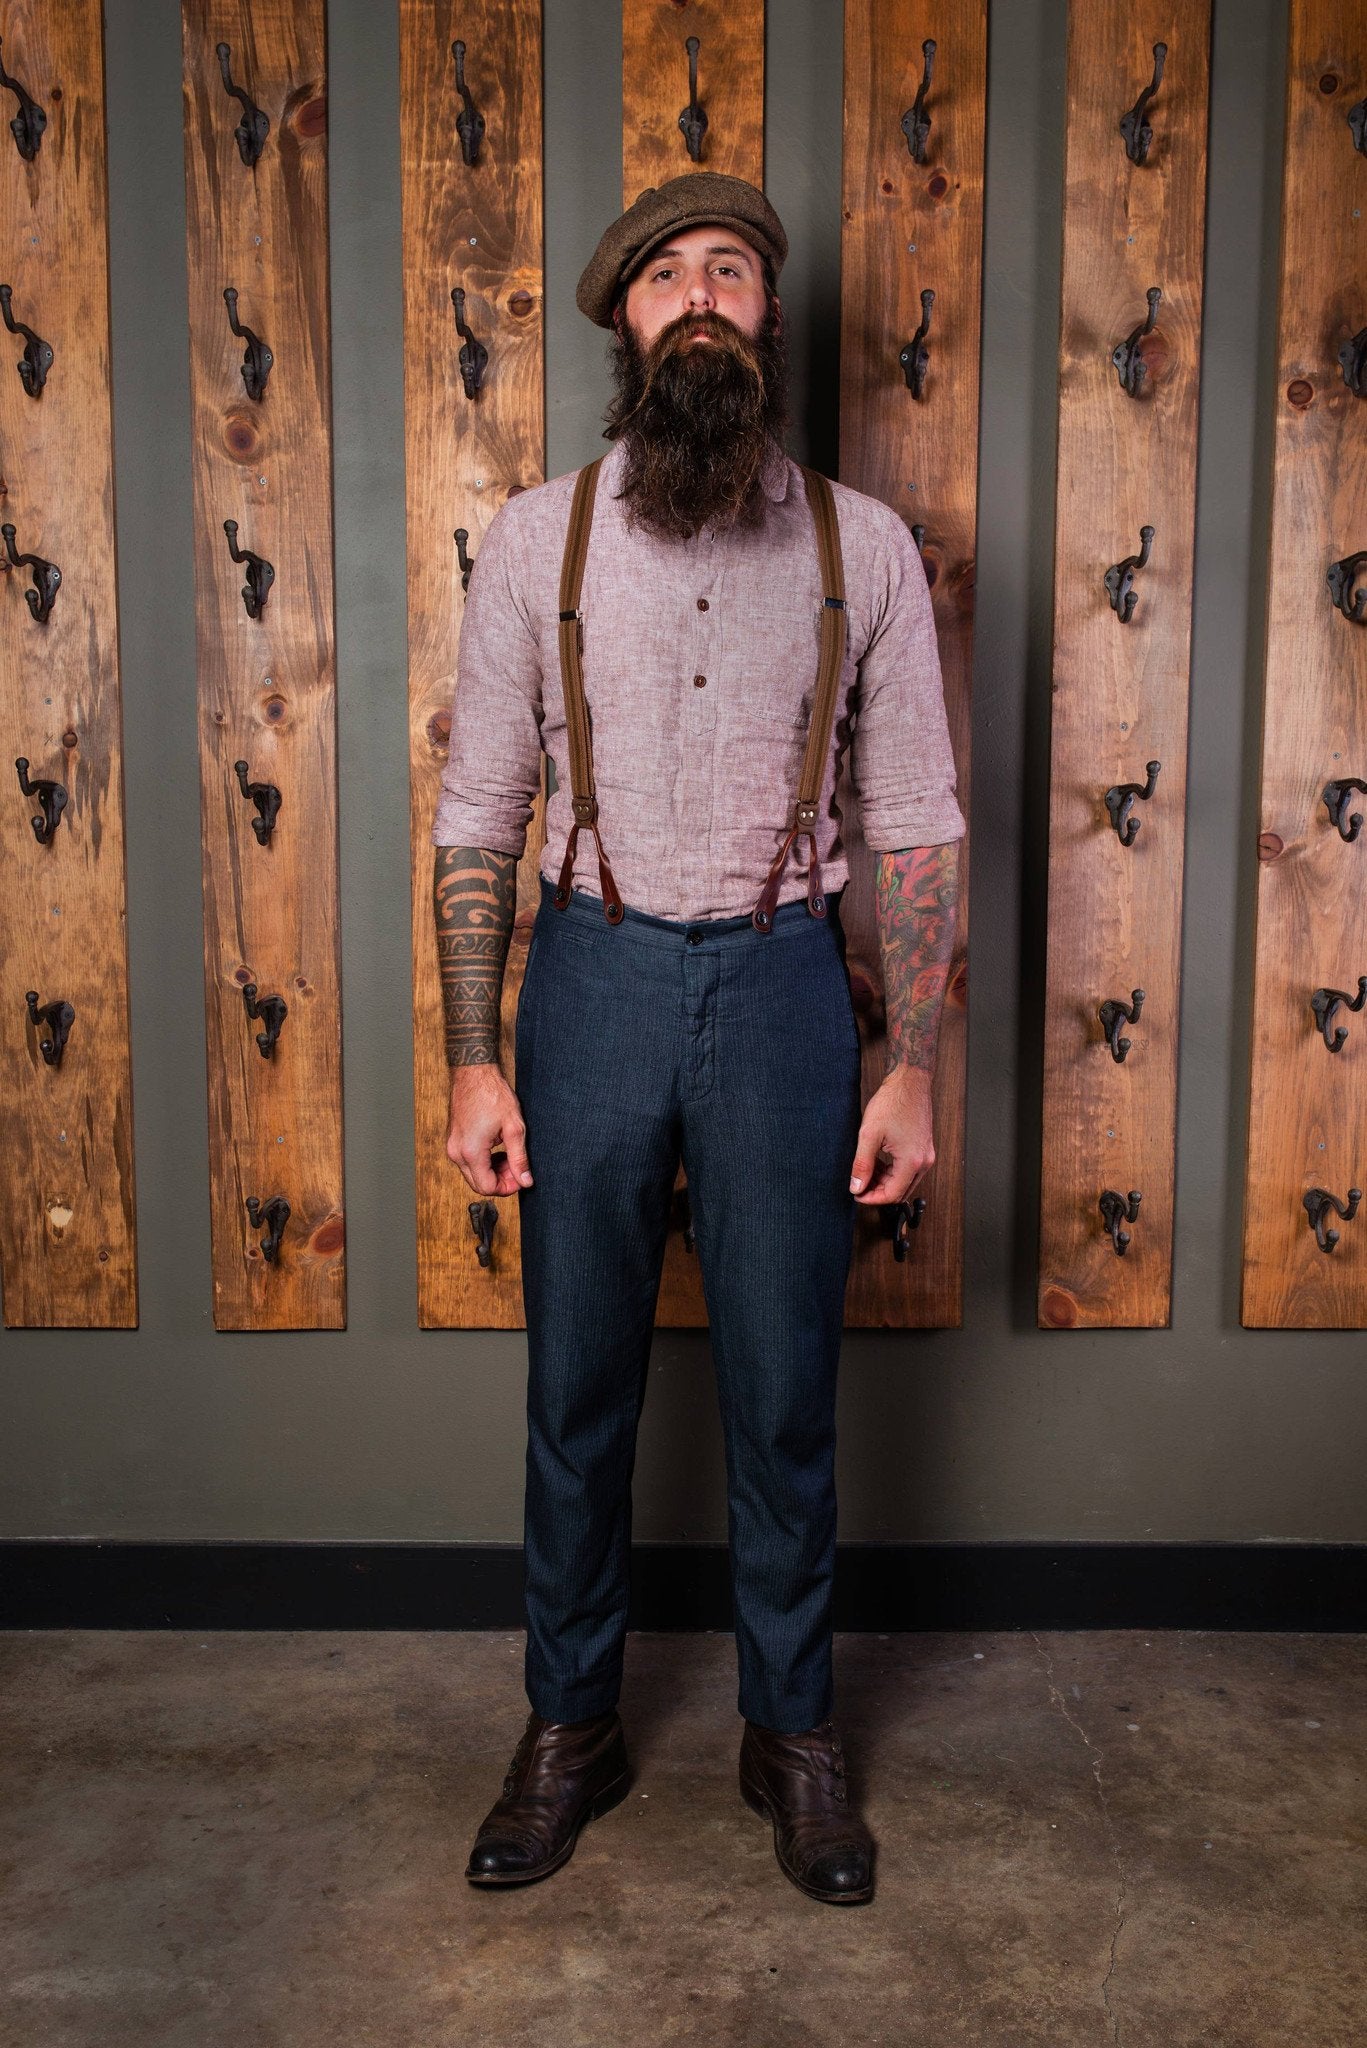 Thin or wide suspenders? How to choose the right width - JJ Suspenders